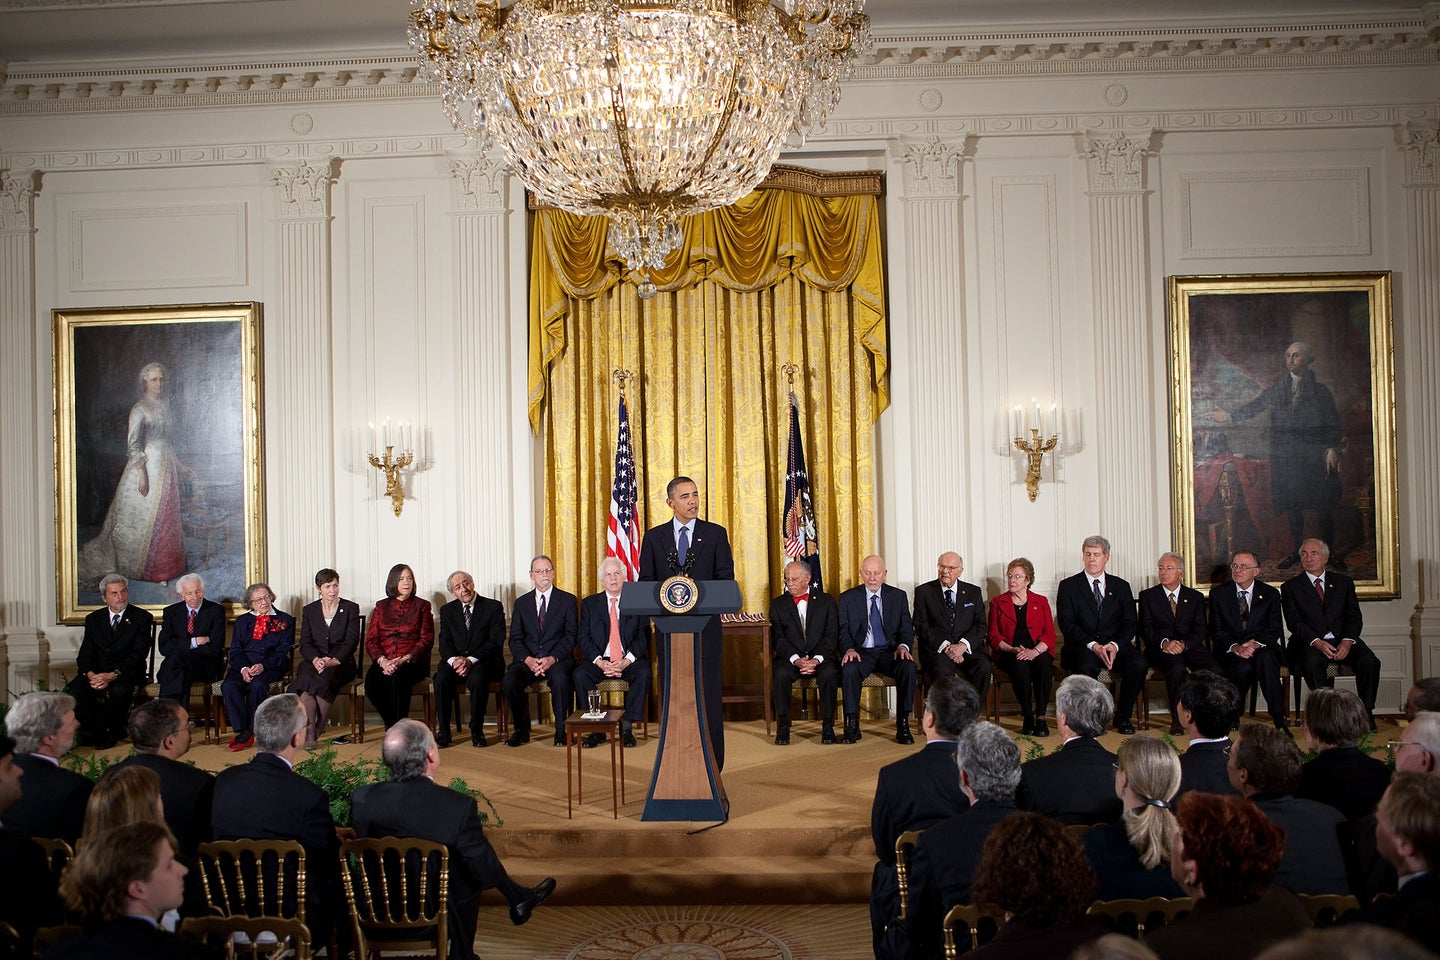 President Barack Obama speaks at the National Medal of Technology and Innovation awards, November 17, 2010. National Medal of Science recipient Warren Washington sits to his left.